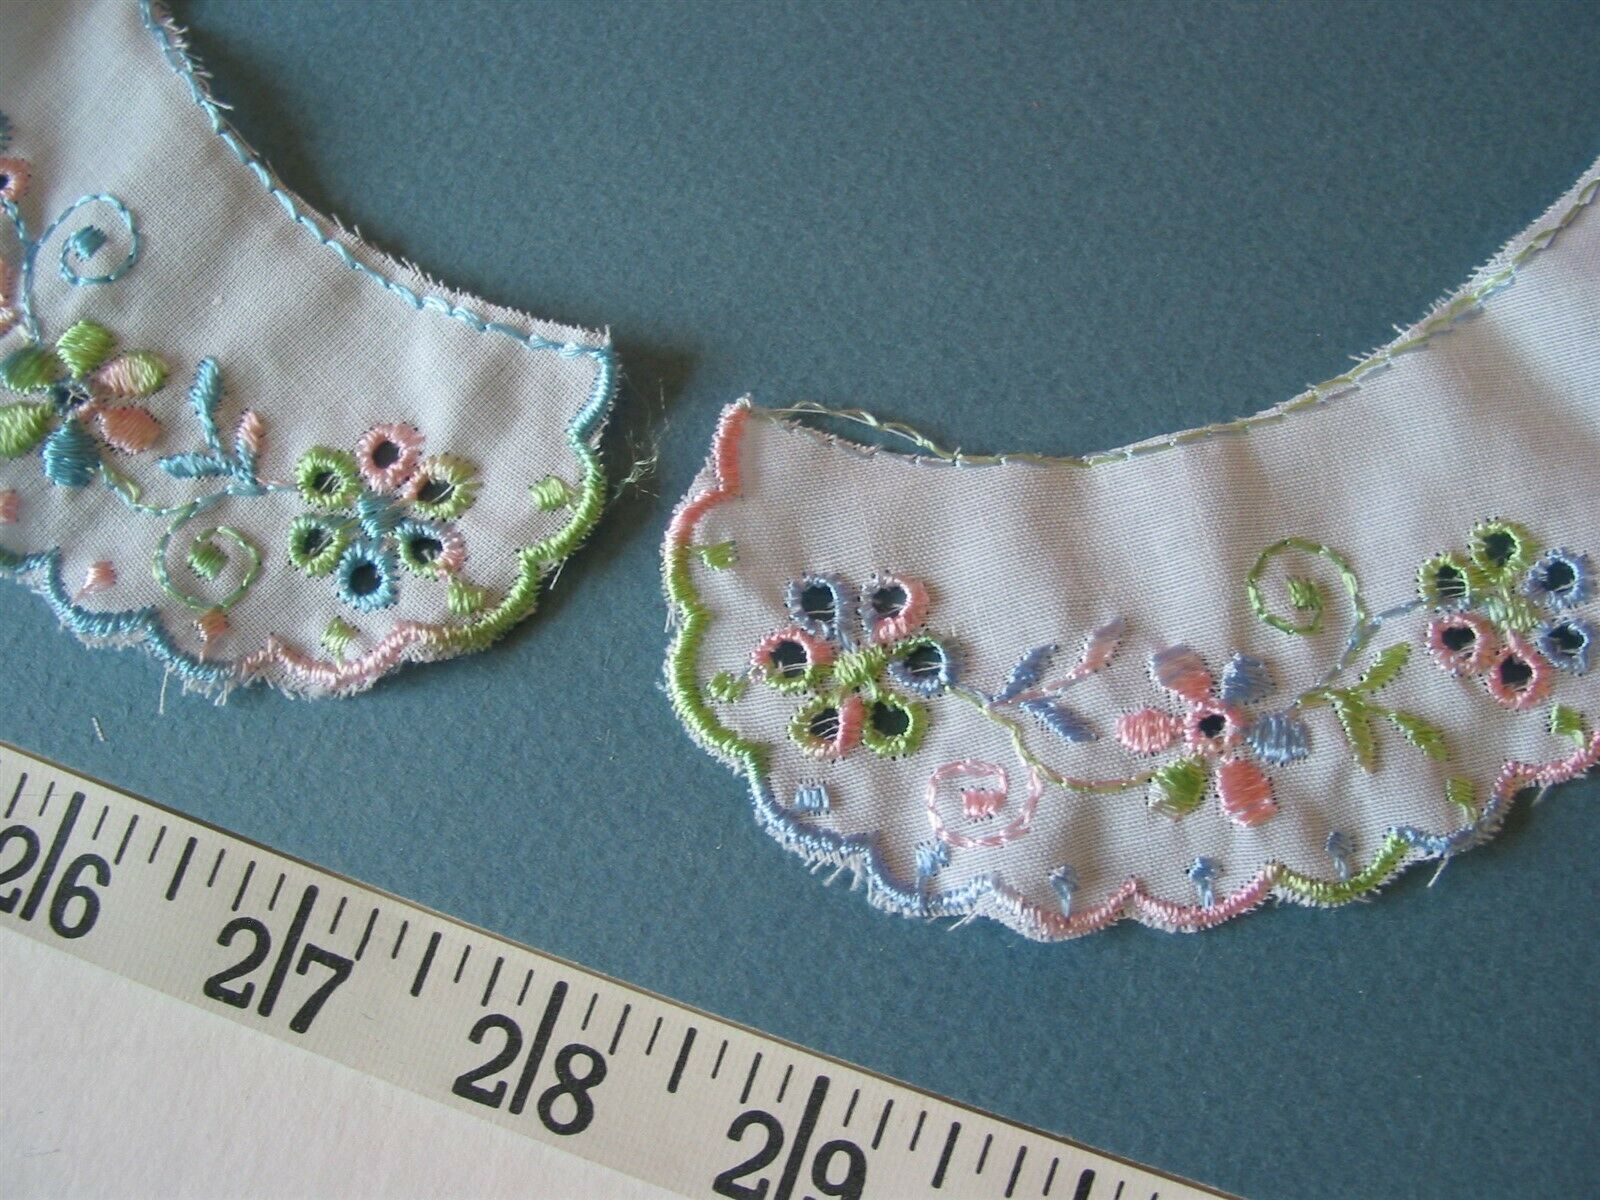 4317 Embroidered White Poly Cotton Collars Or? 72 Pair Unique